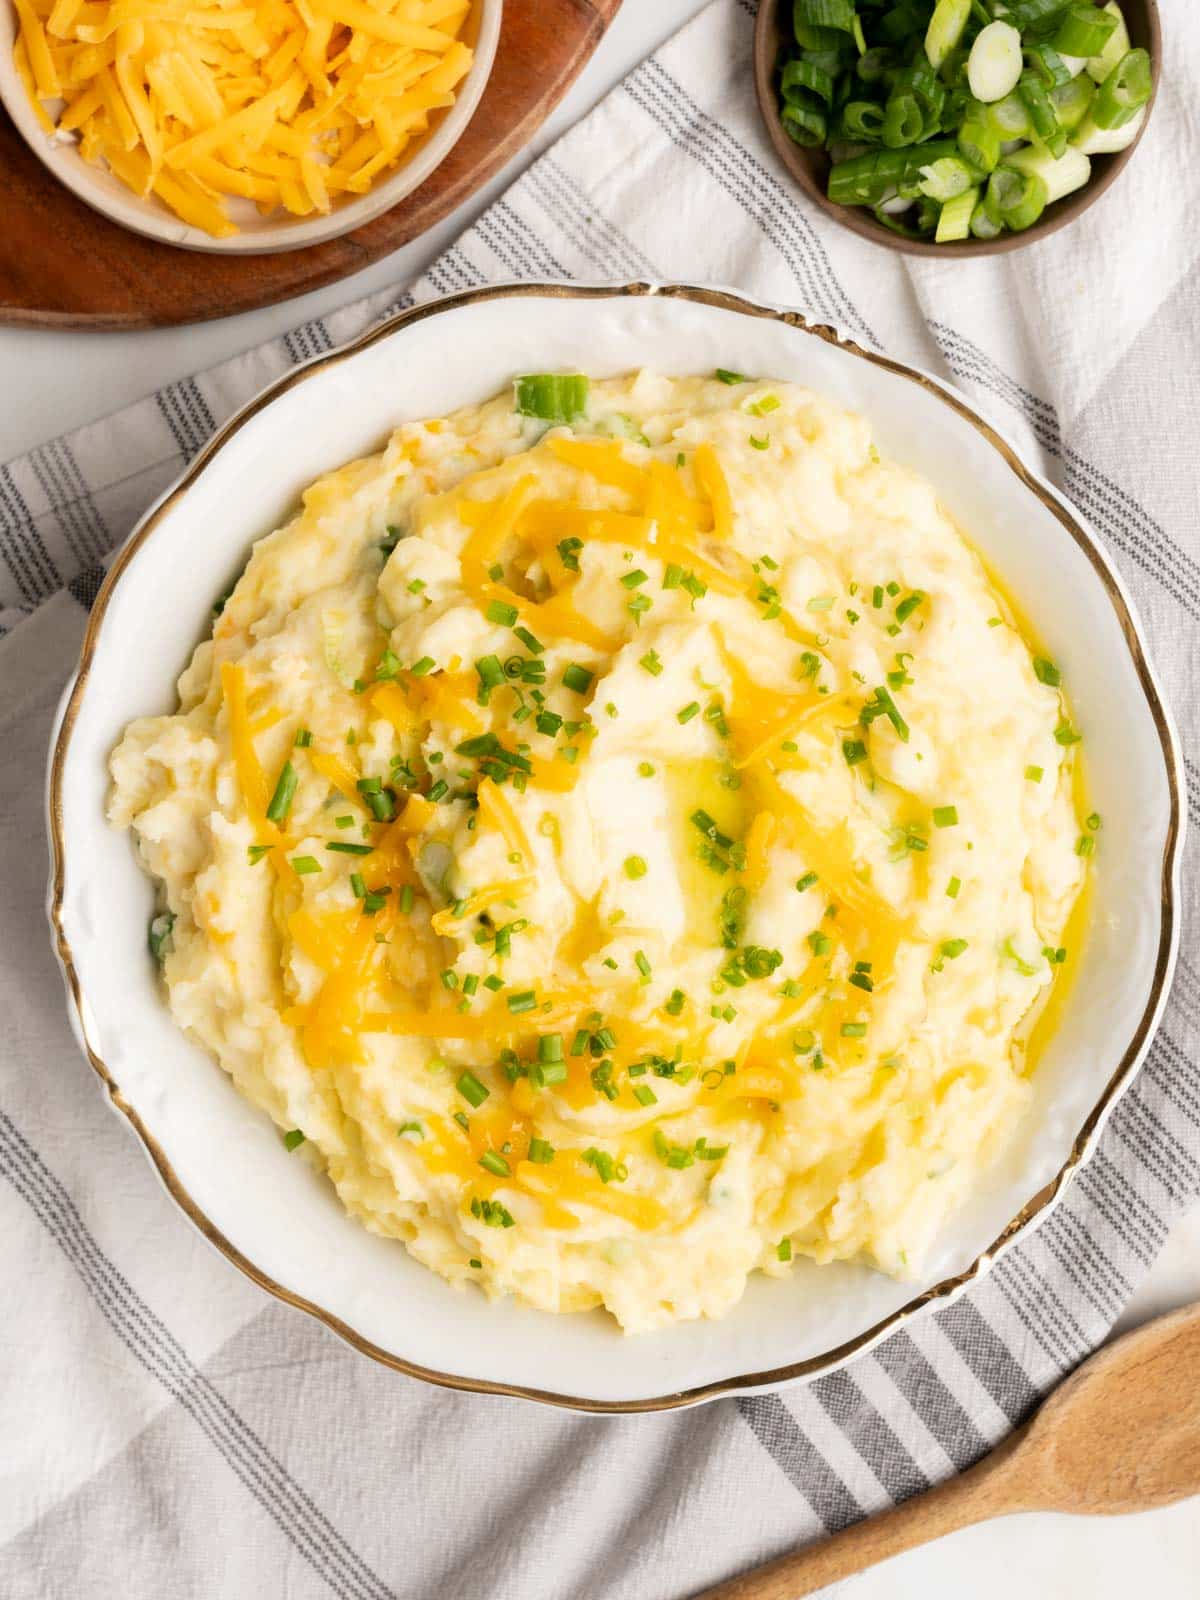 Mashed potatoes with green onion in a bowl.